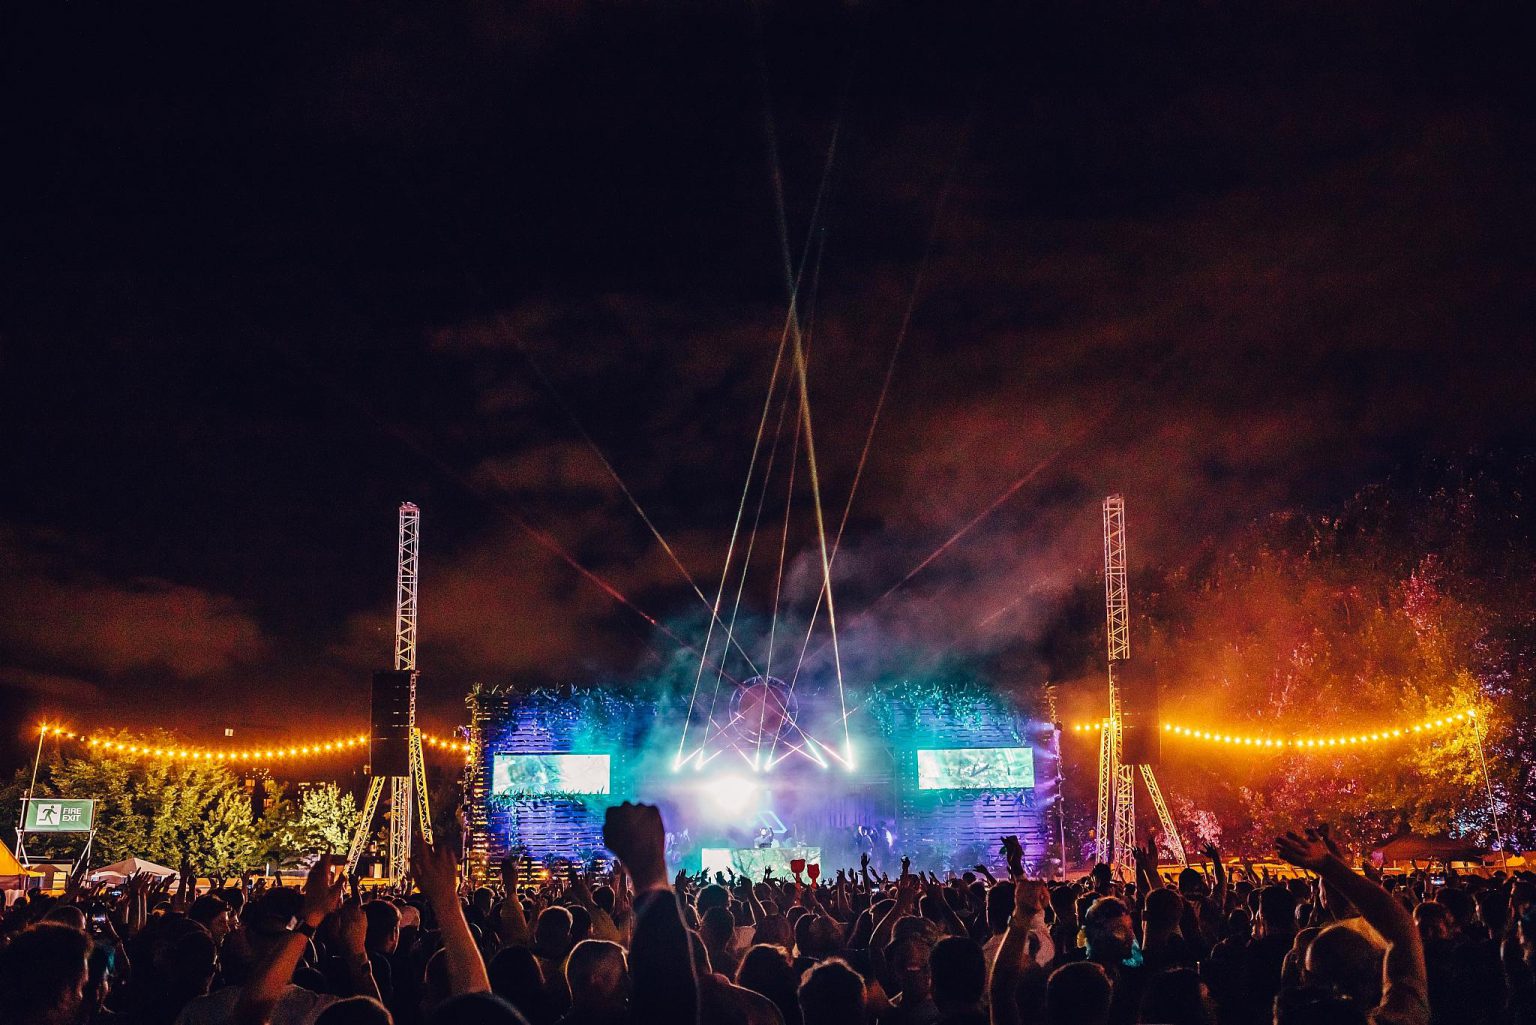 Anjunadeep Reveals Lineup for Open Air London This Summer EDM Identity